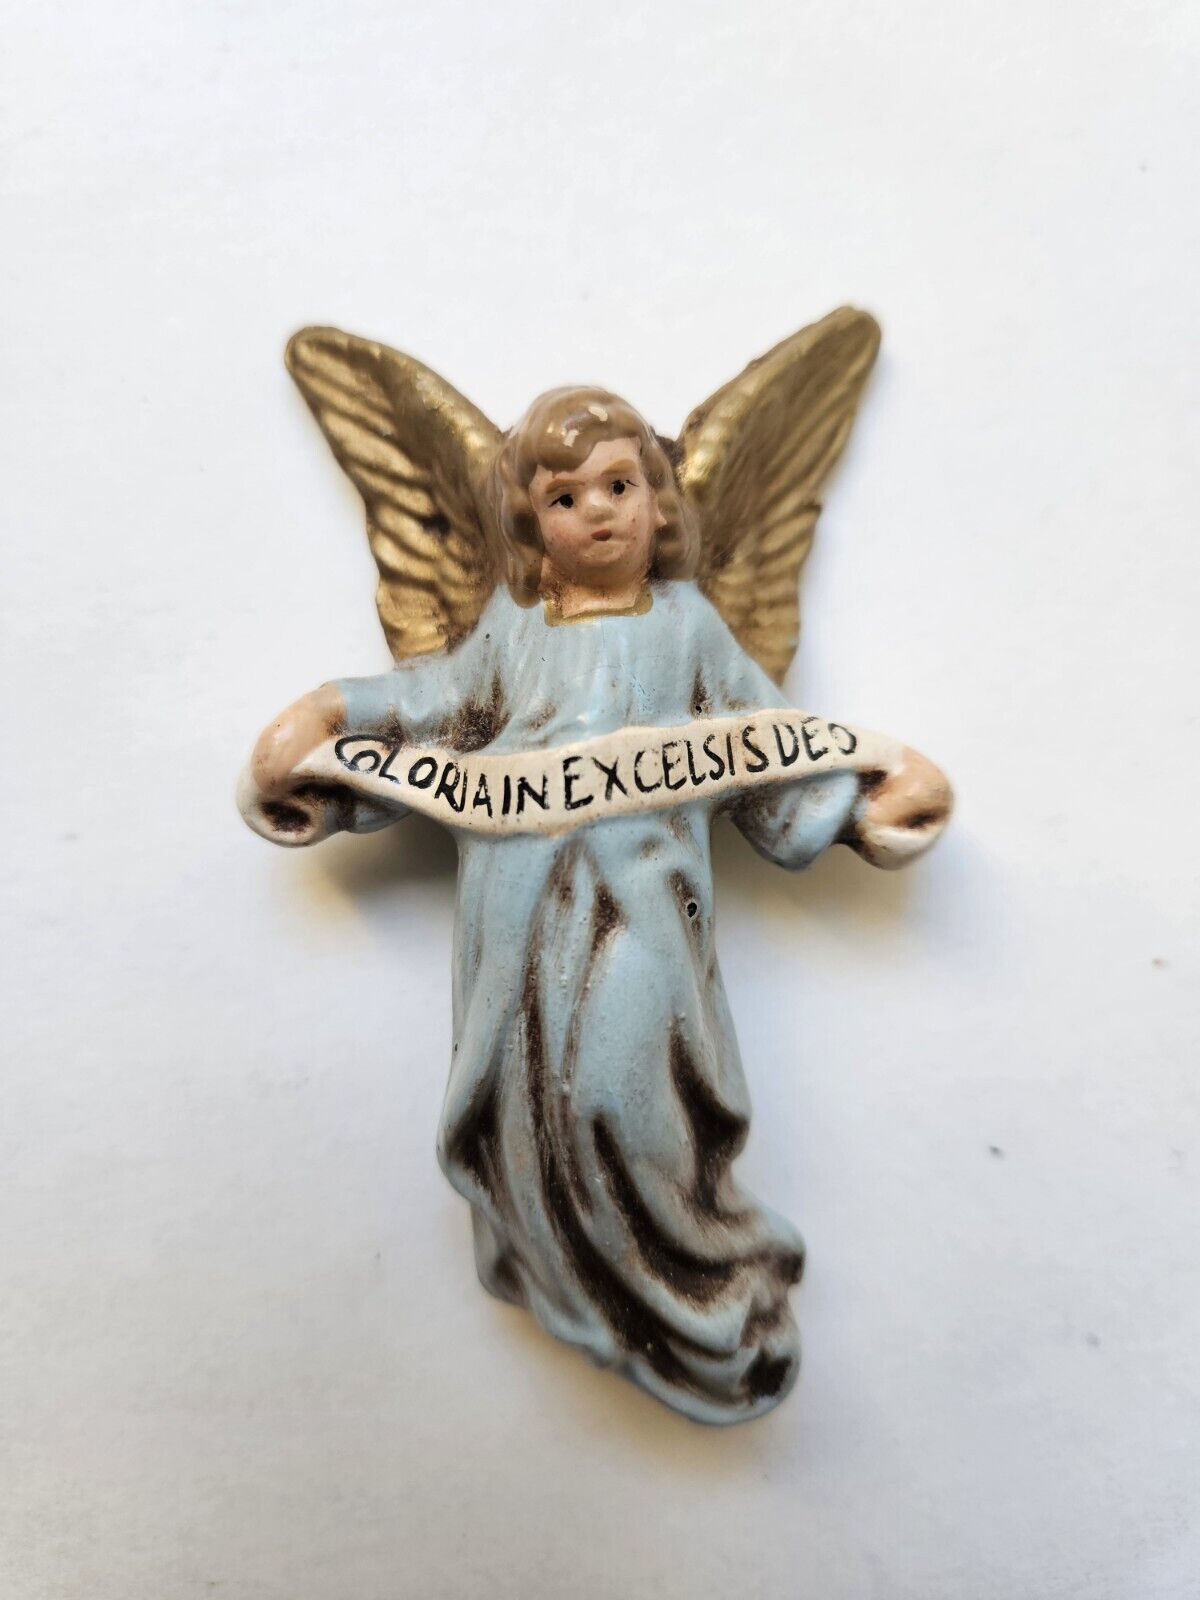 ANTIQUE VINTAGE CERAMIC ANGEL GLORIA IN EXCELSIS DEO CHRISTMAS ORNAMENT blue